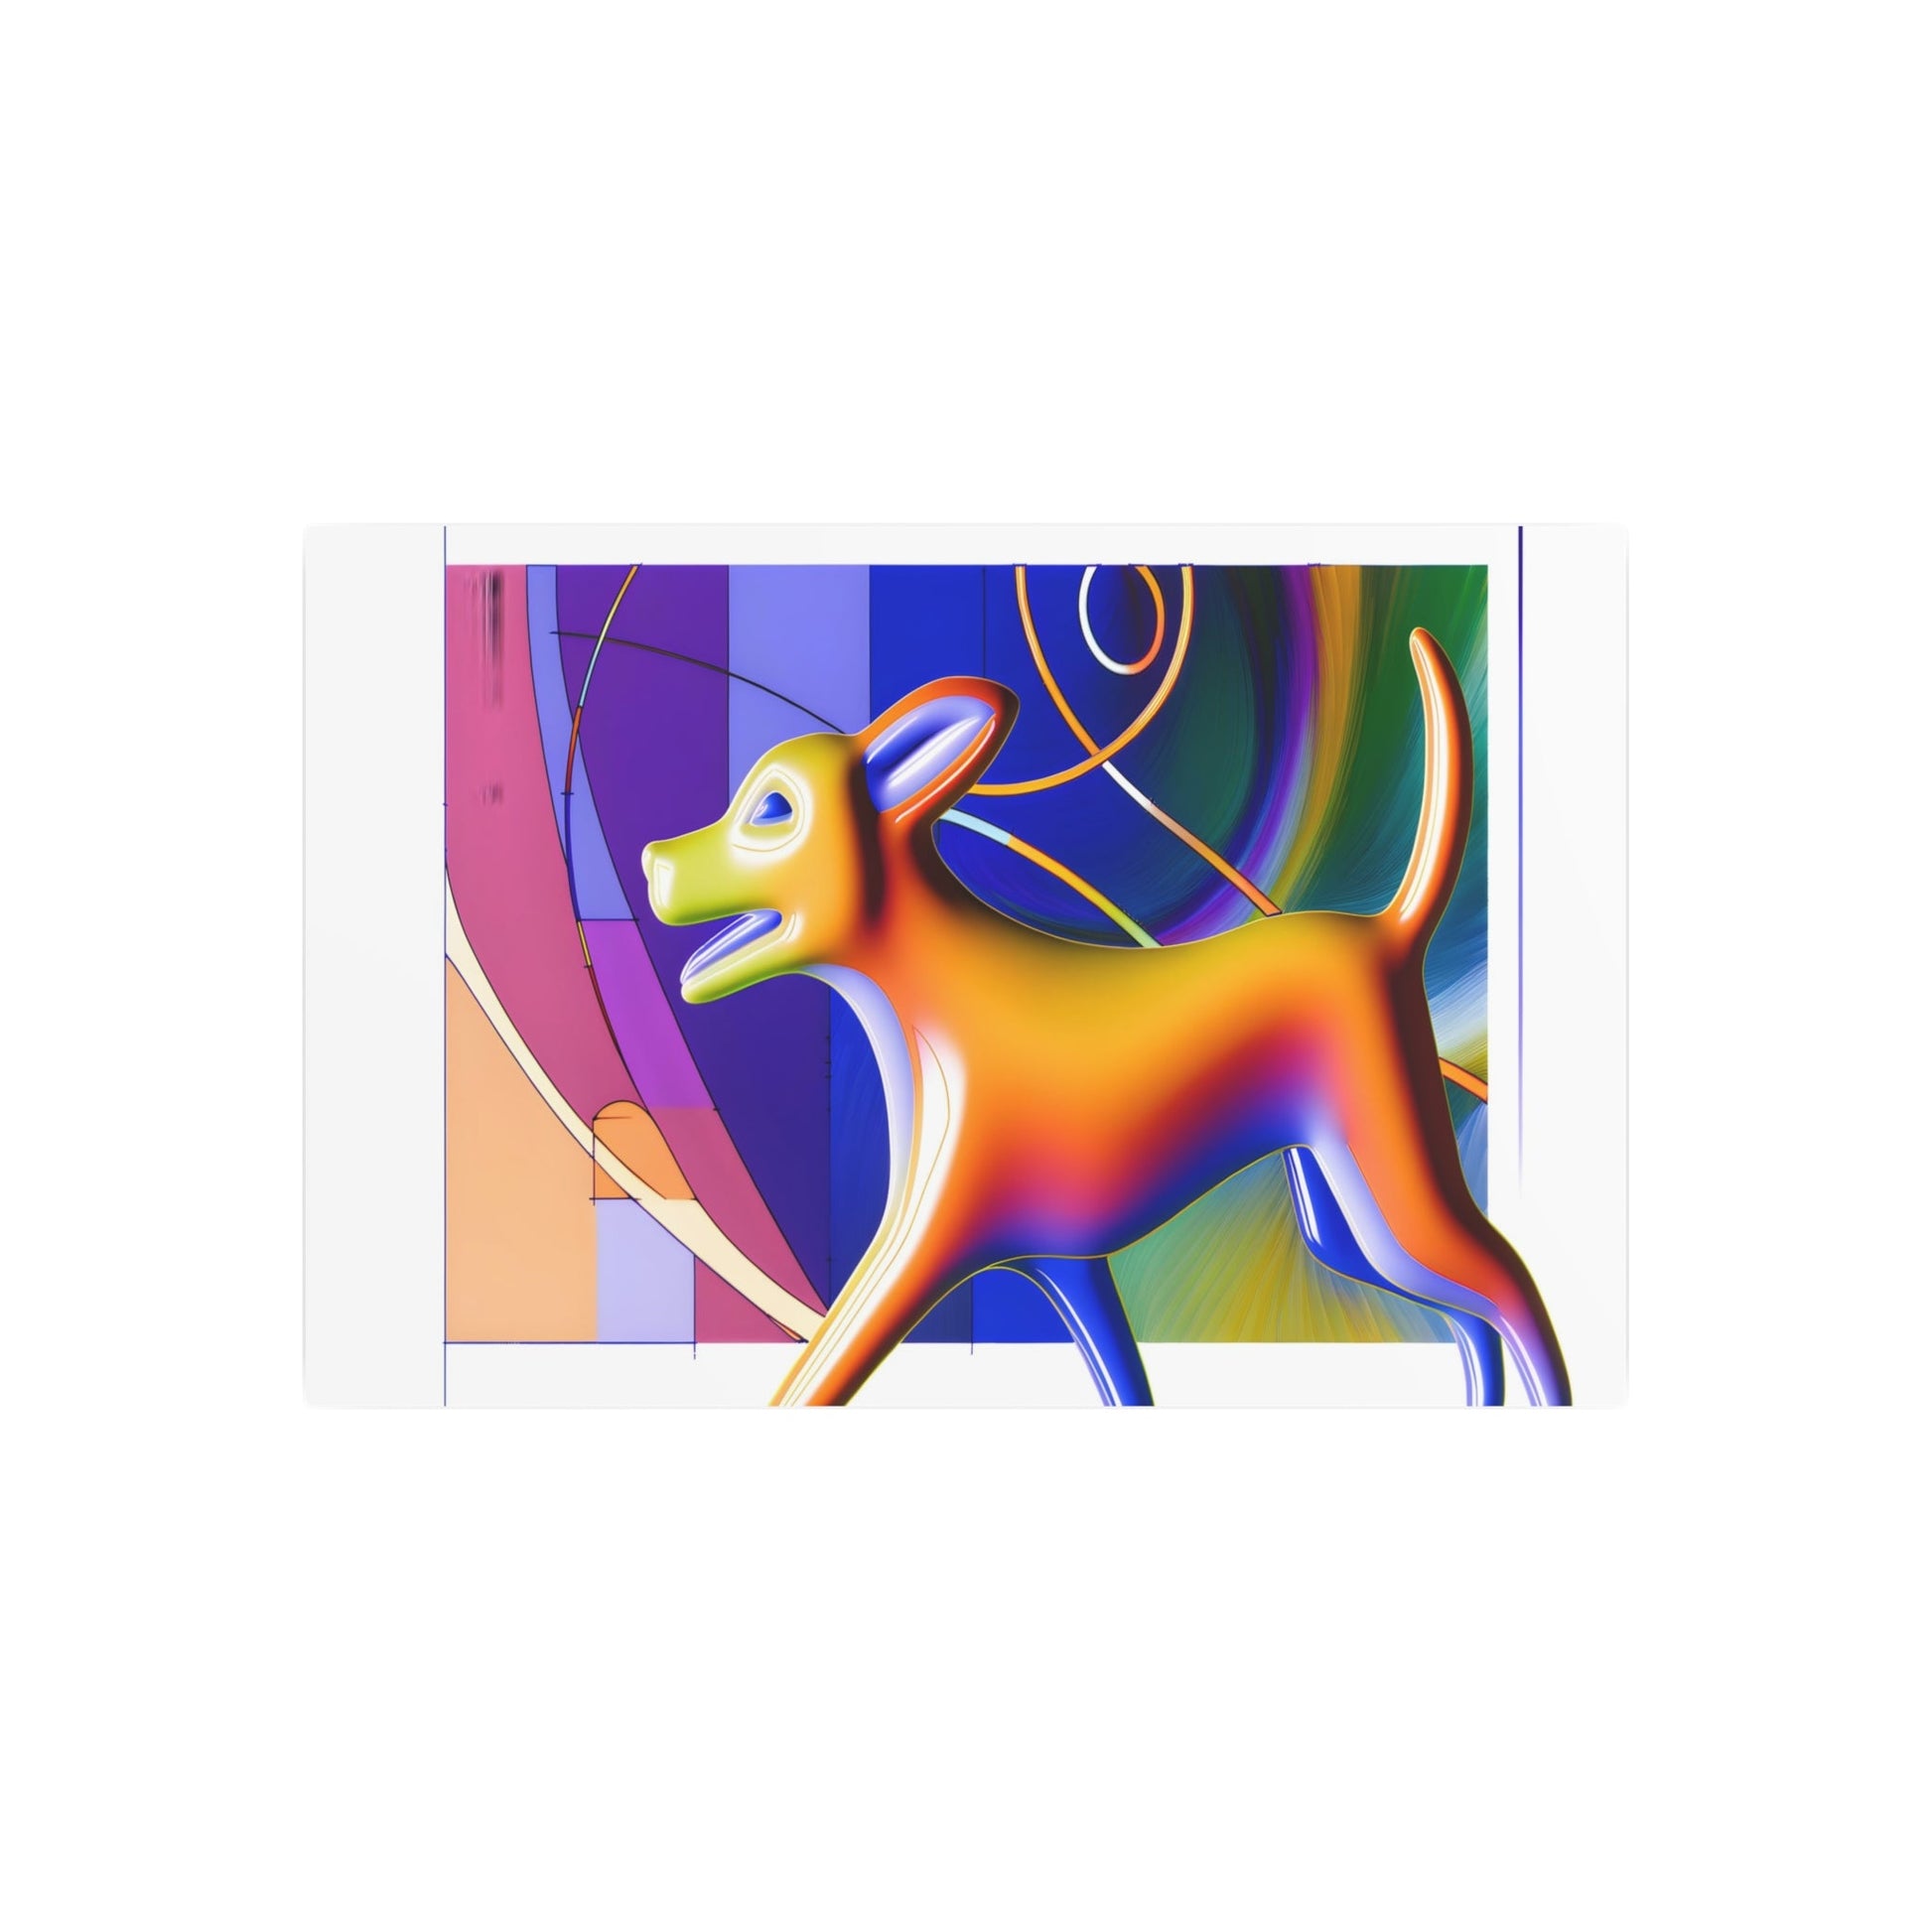 Metal Poster Art | "Modern & Contemporary Digital Art - Intricately Detailed Brightly Colored Dog in Futuristic Whimsical Landscape Illustration" - Metal Poster Art 36″ x 24″ (Horizontal) 0.12''